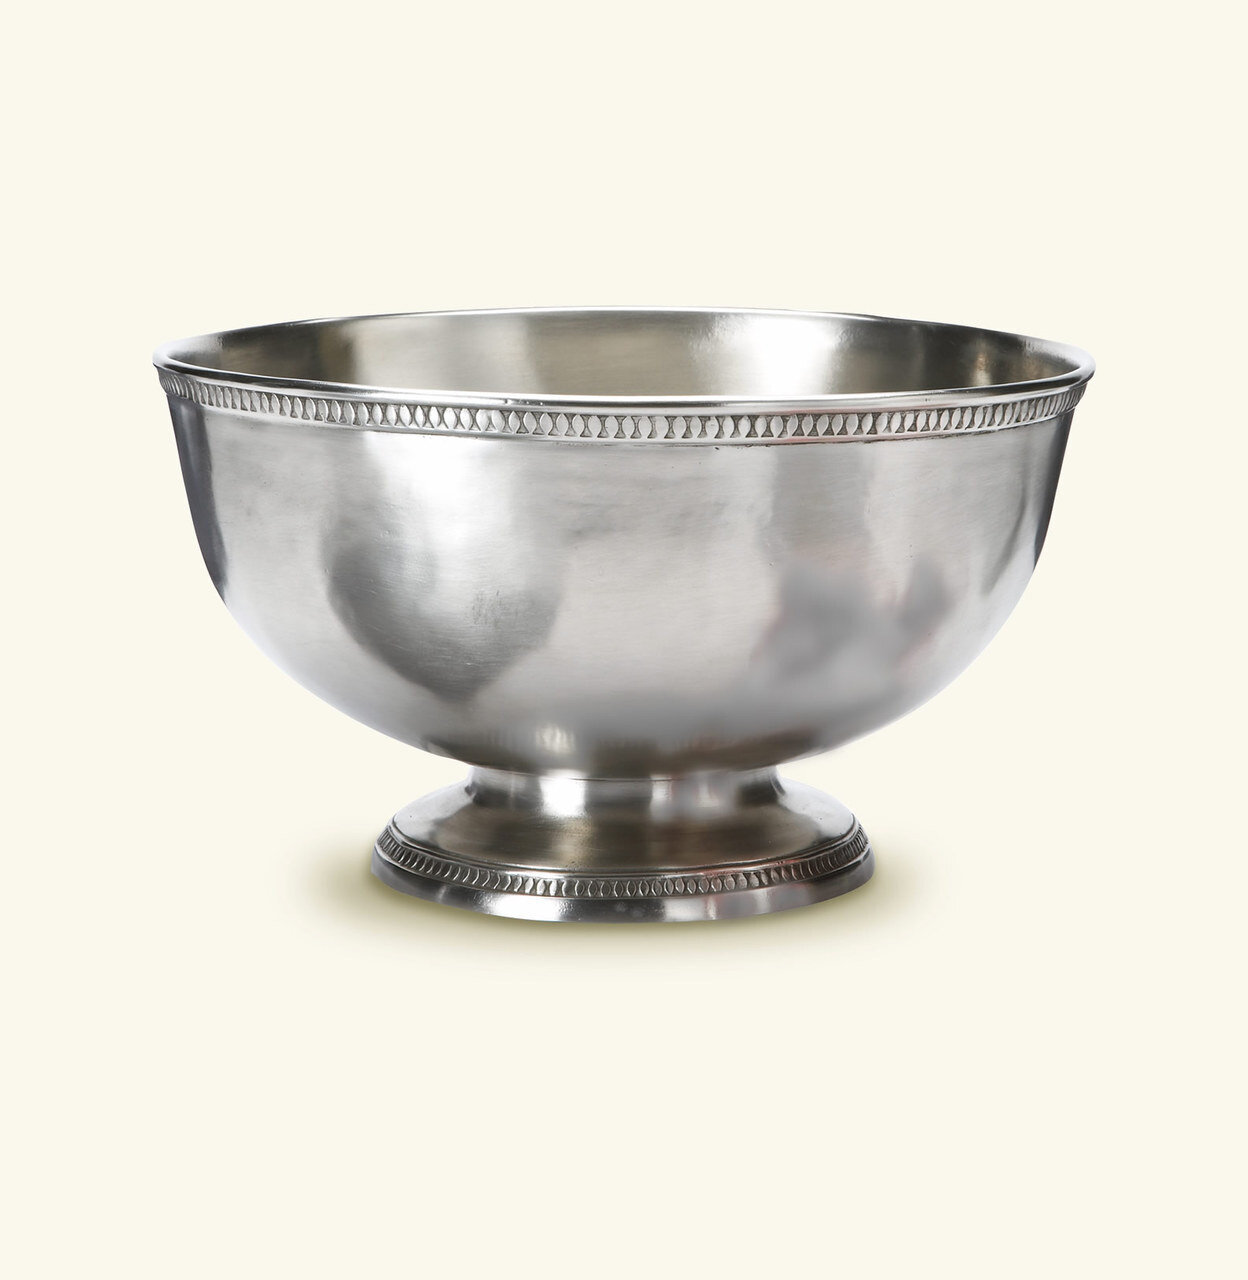 Match Pewter Punch Bowl a799.5